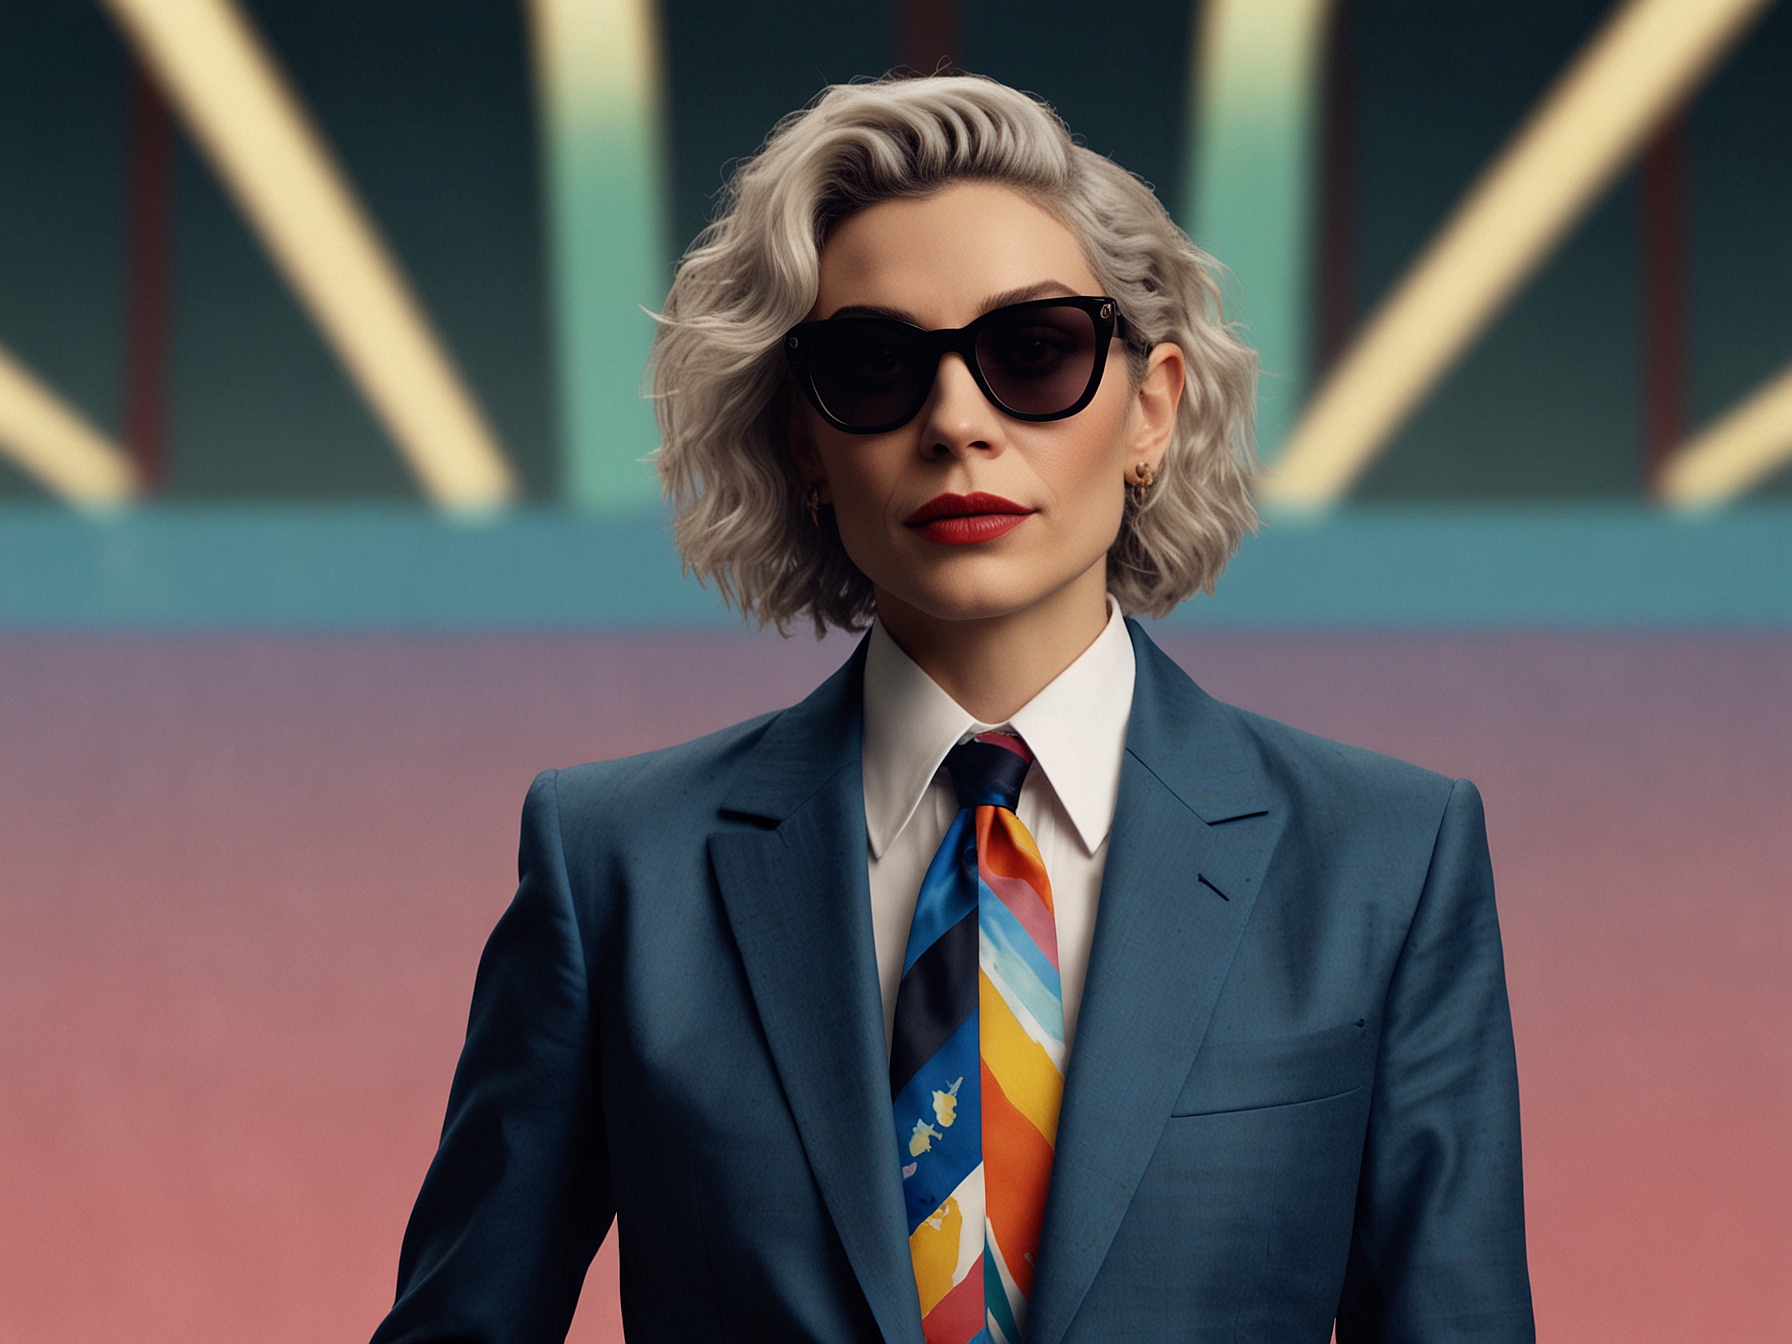 Photographer Emma Swanson directs a dynamic photoshoot for Billboard's 2024 Pride edition, featuring St. Vincent in a blend of tailored suits and whimsical accessories, highlighting her fearless fashion sense and multifaceted persona.